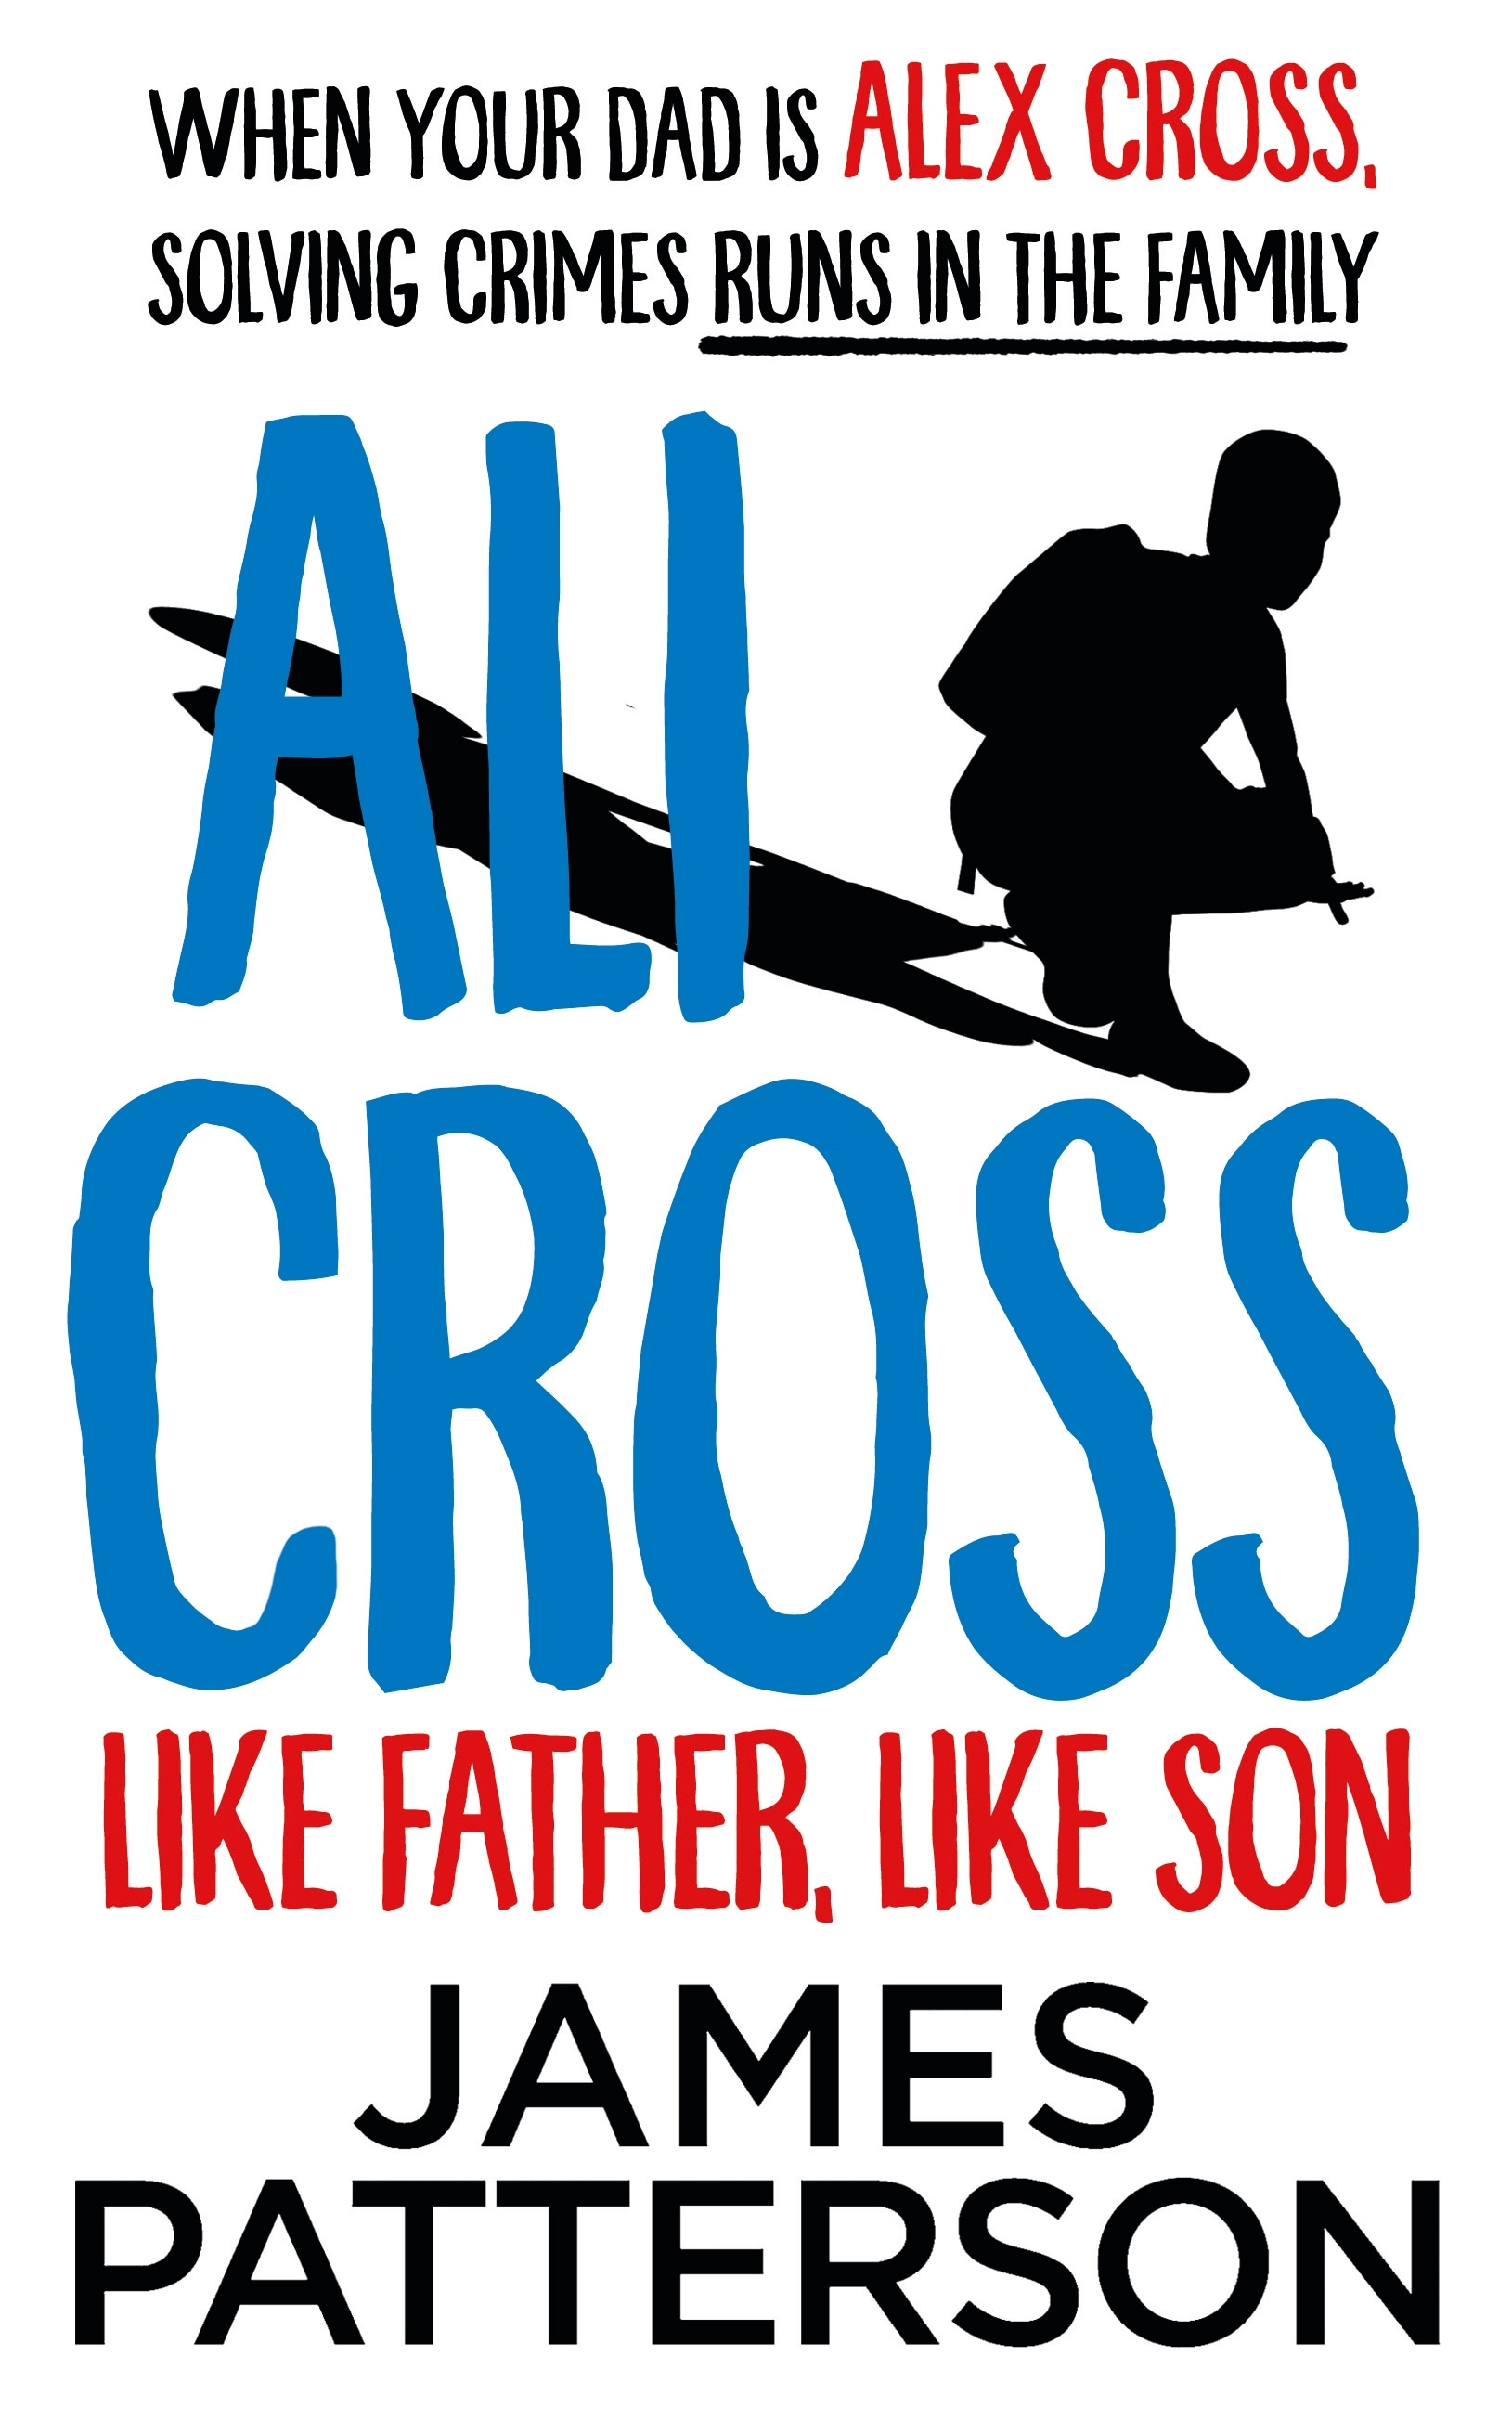 Book “Ali Cross: Like Father, Like Son” by James Patterson — July 8, 2021